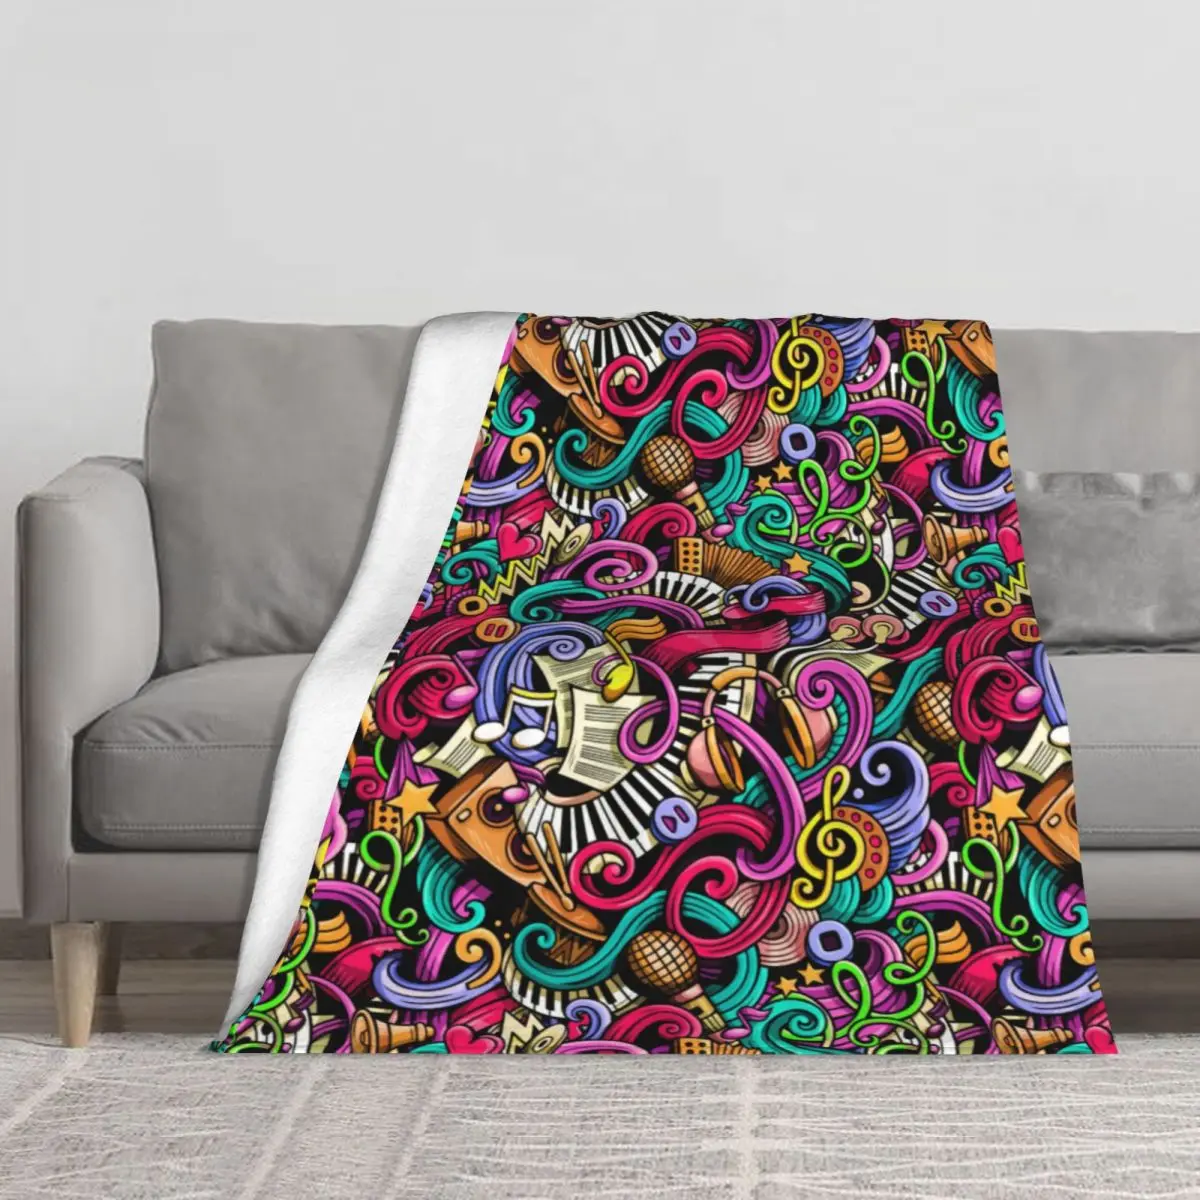 

Pop Art Print Blanket Your Own Music Customize Knee Throw Blanket On the Bed,Bed,Beds,For Bed,Bedroom Fleeze Blankets